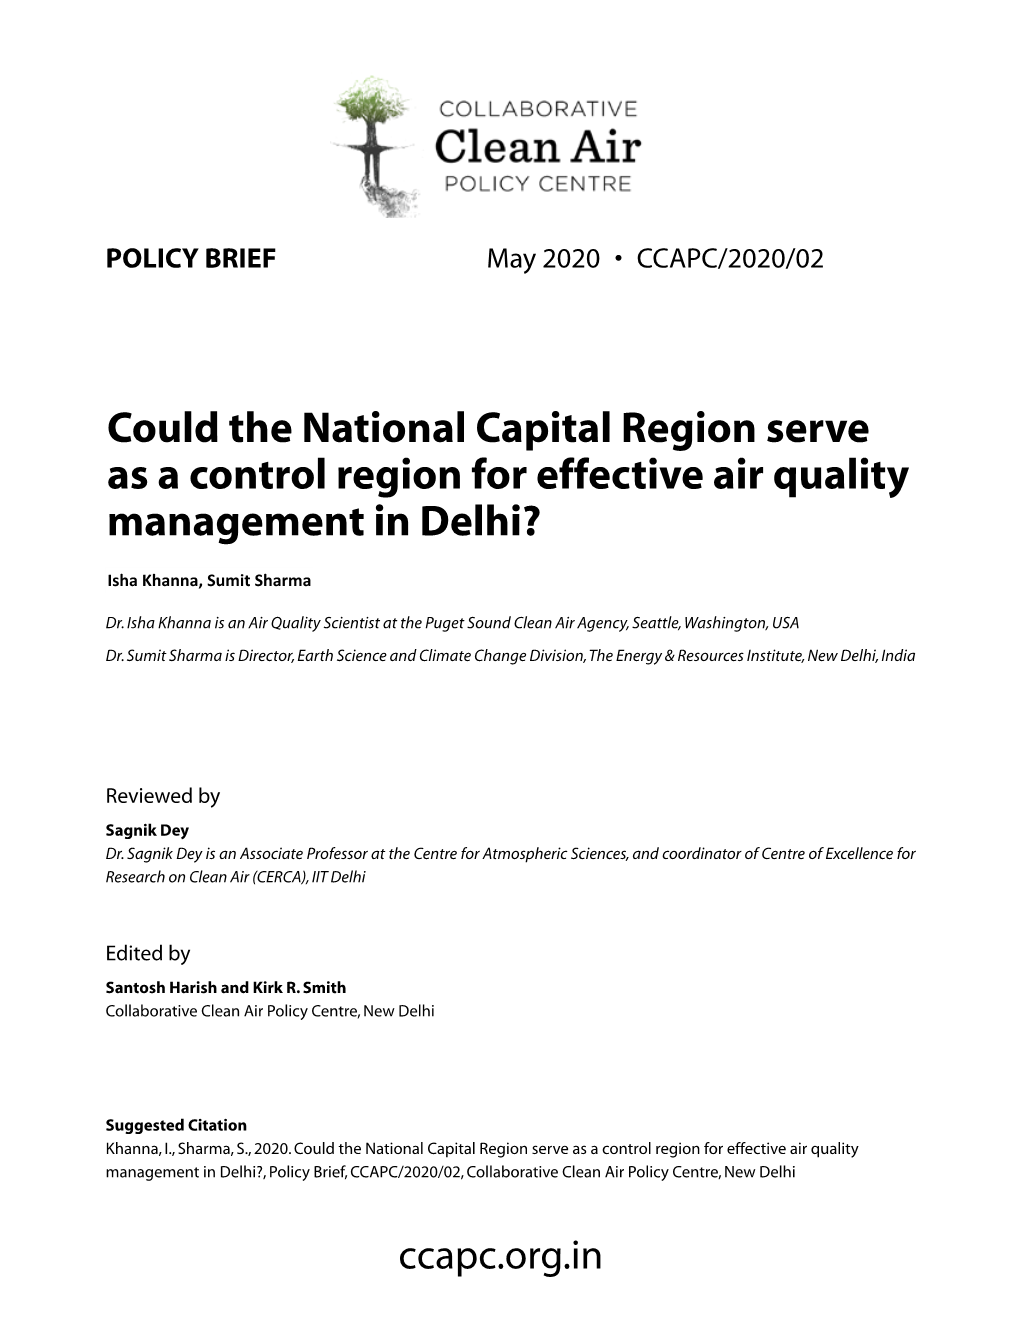 Could the National Capital Region Serve As a Control Region for Effective Air Quality Management in Delhi?